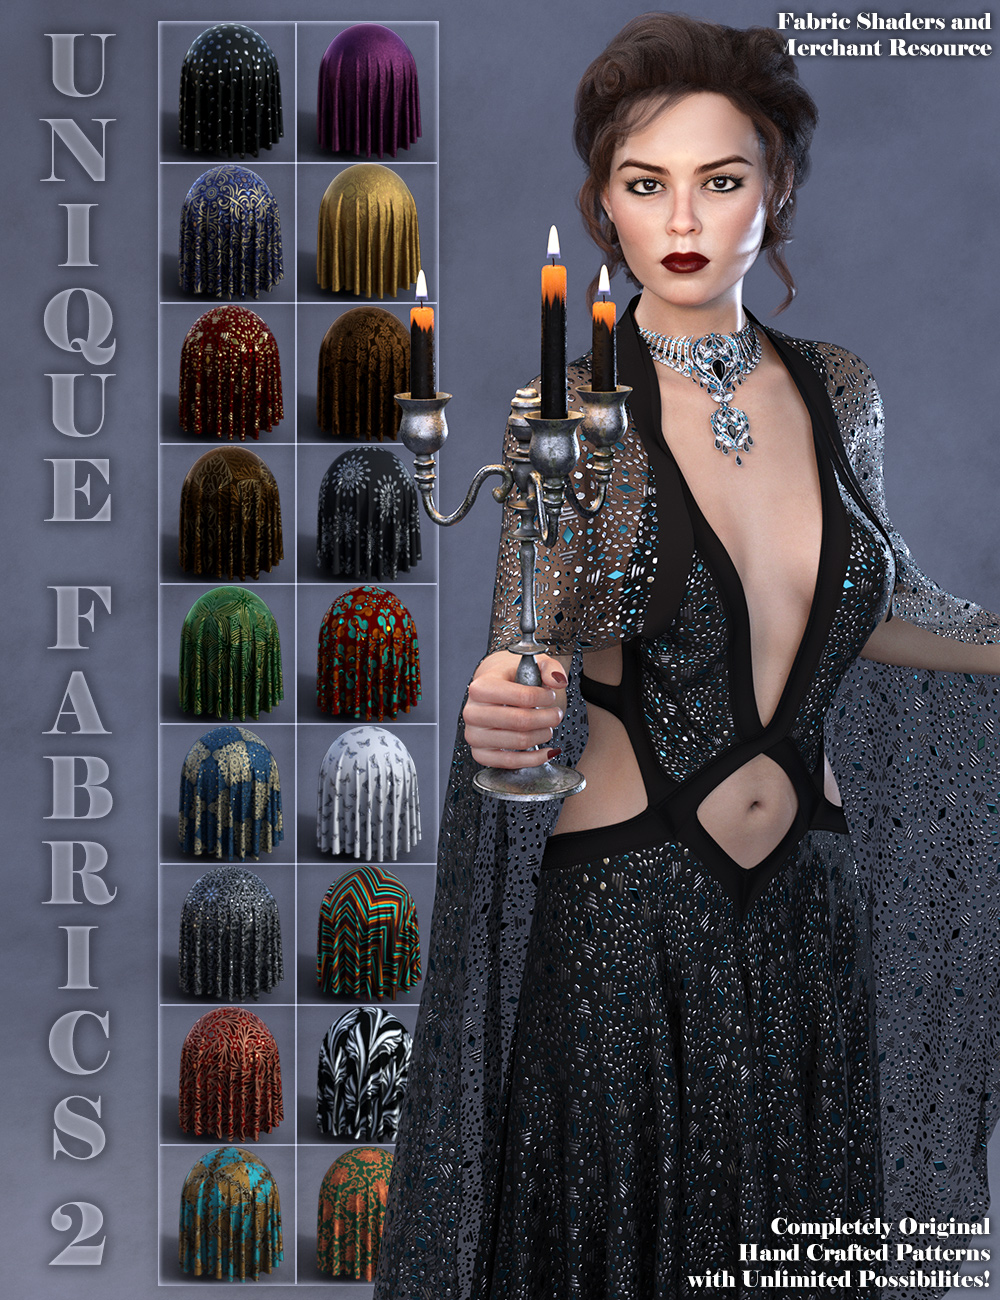 Unique Fabrics Shaders and Merchant Resource 2 by: ARTCollaborations, 3D Models by Daz 3D